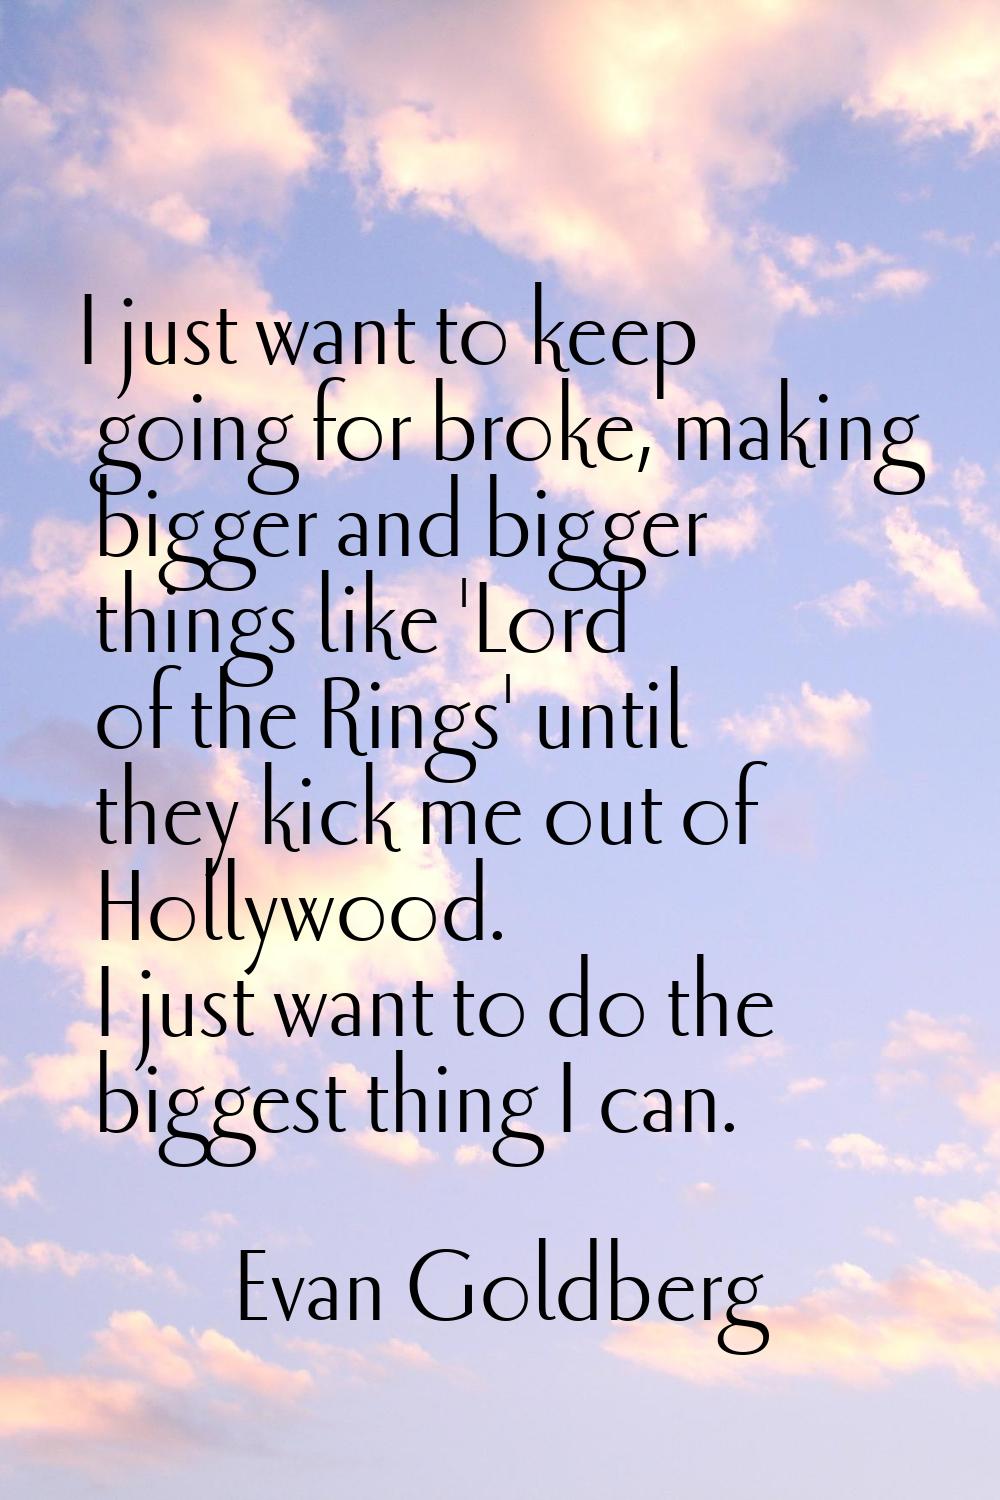 I just want to keep going for broke, making bigger and bigger things like 'Lord of the Rings' until